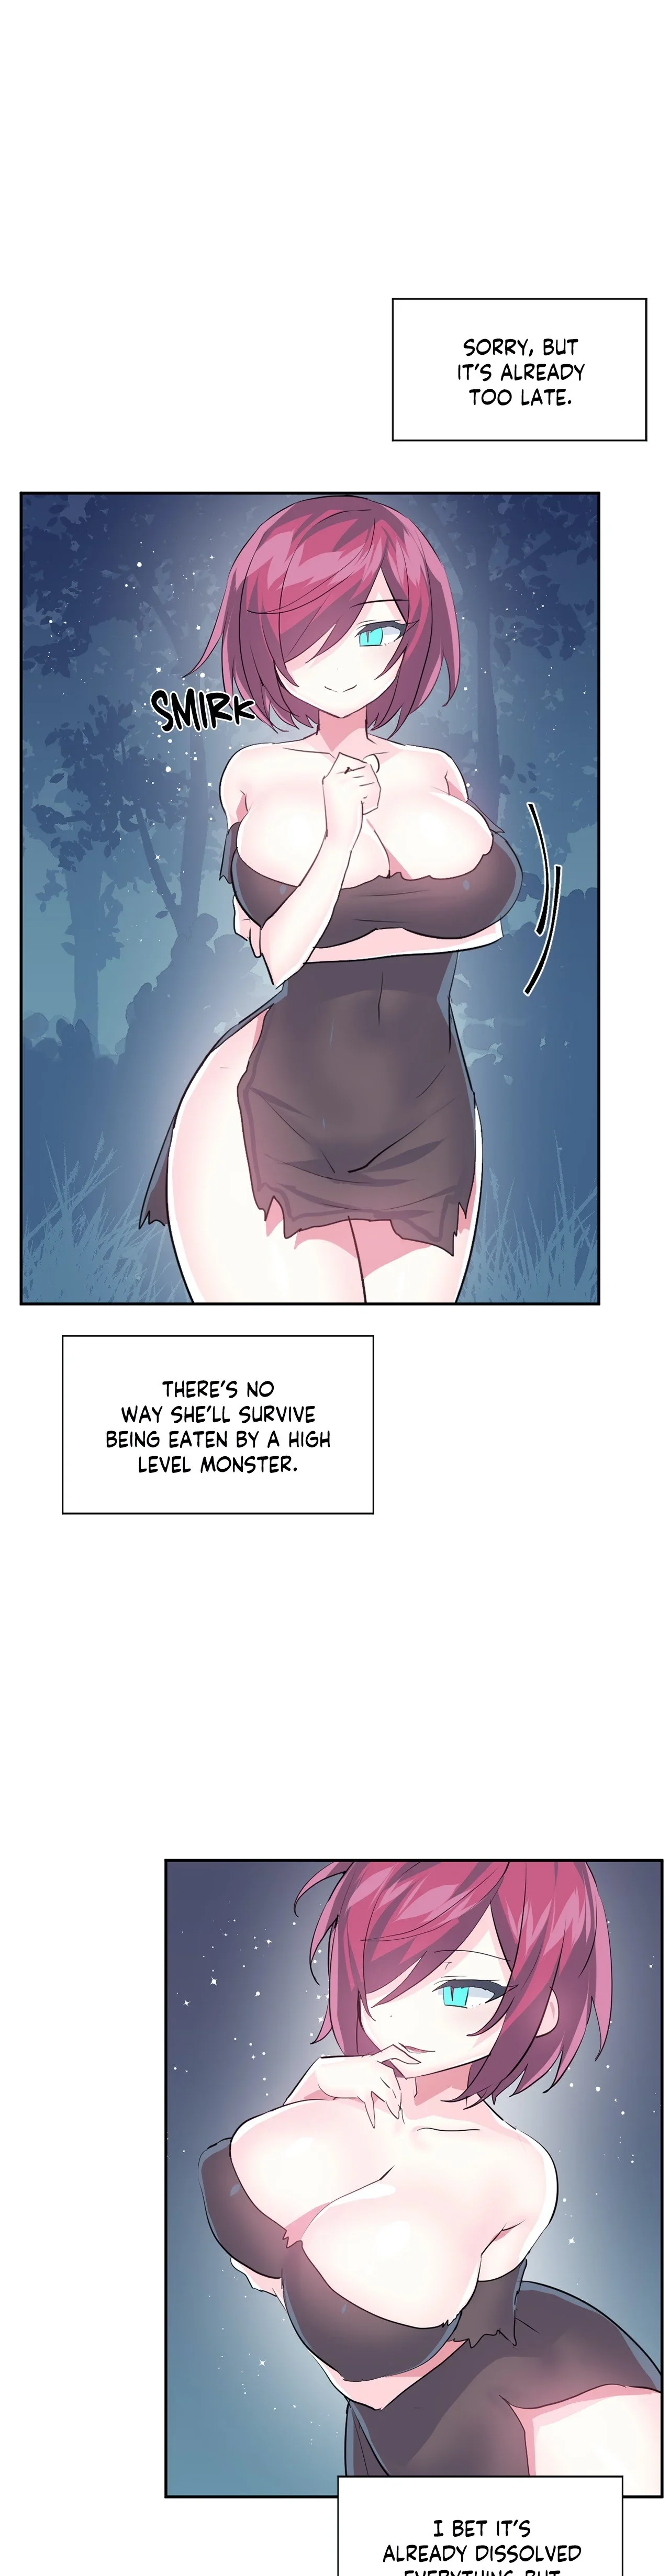 log-in-to-lust-a-land-chap-38-16